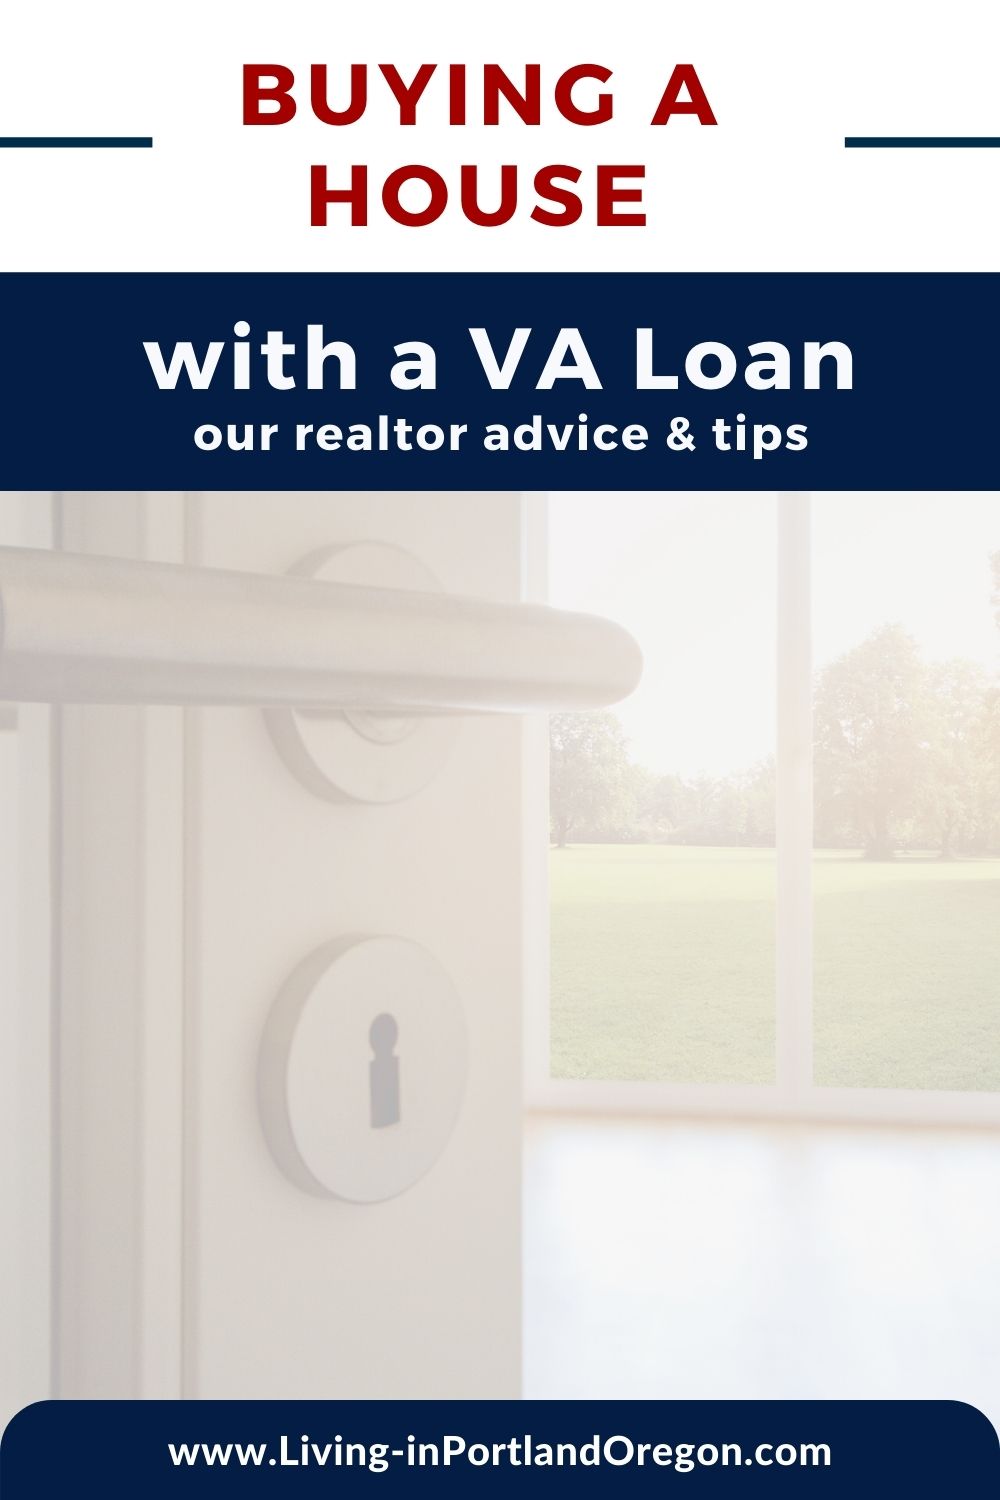 Buying a House with a VA Loan in Portland Oregon, Portalnd OR real estate agents